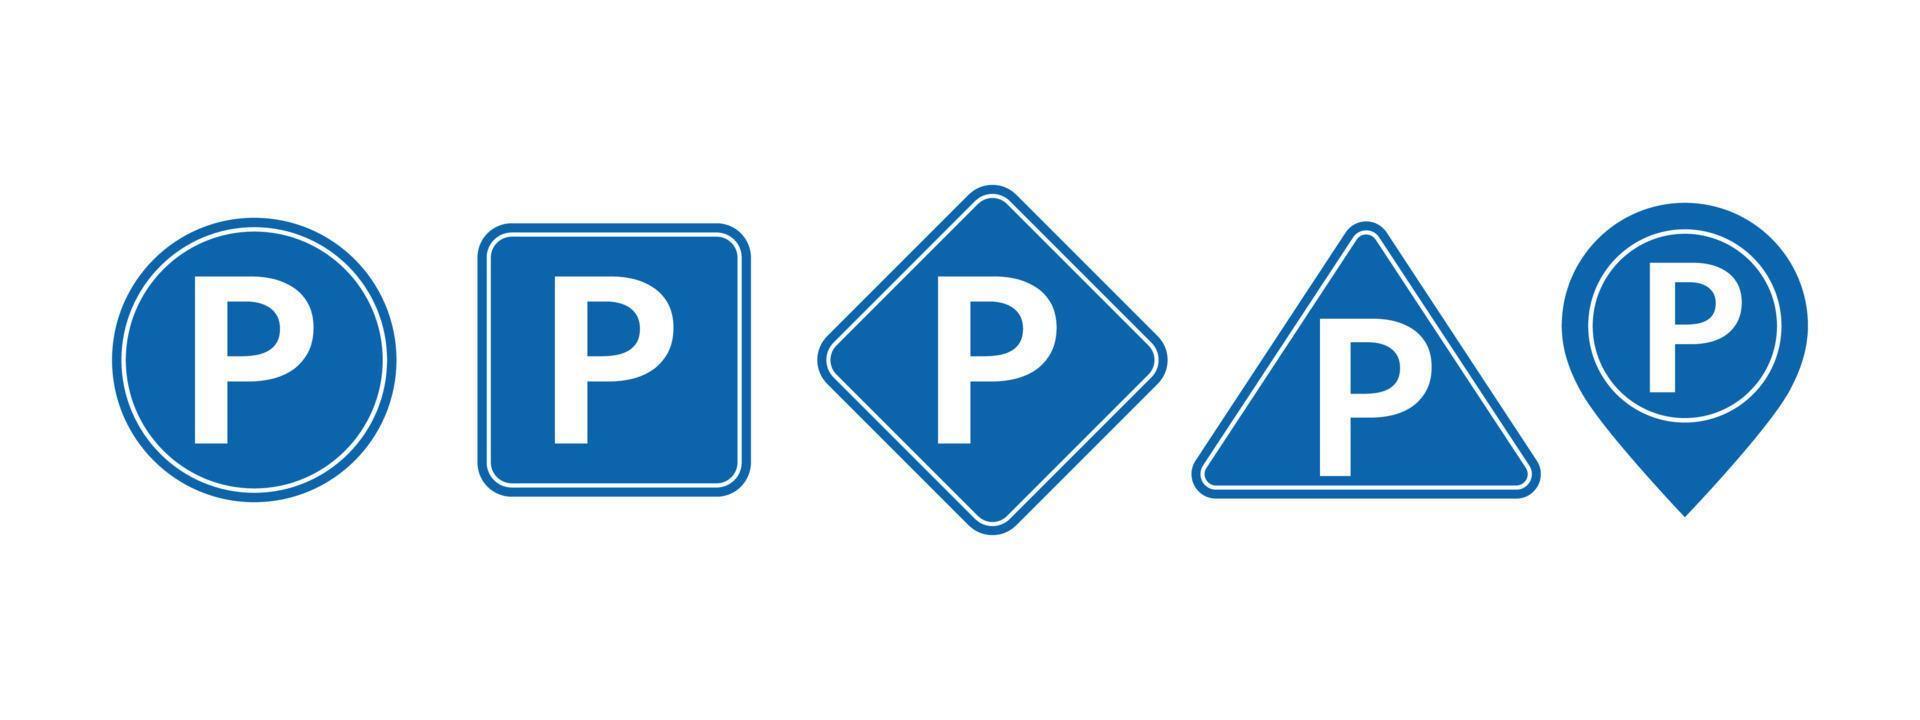 Parking sign vector over white background